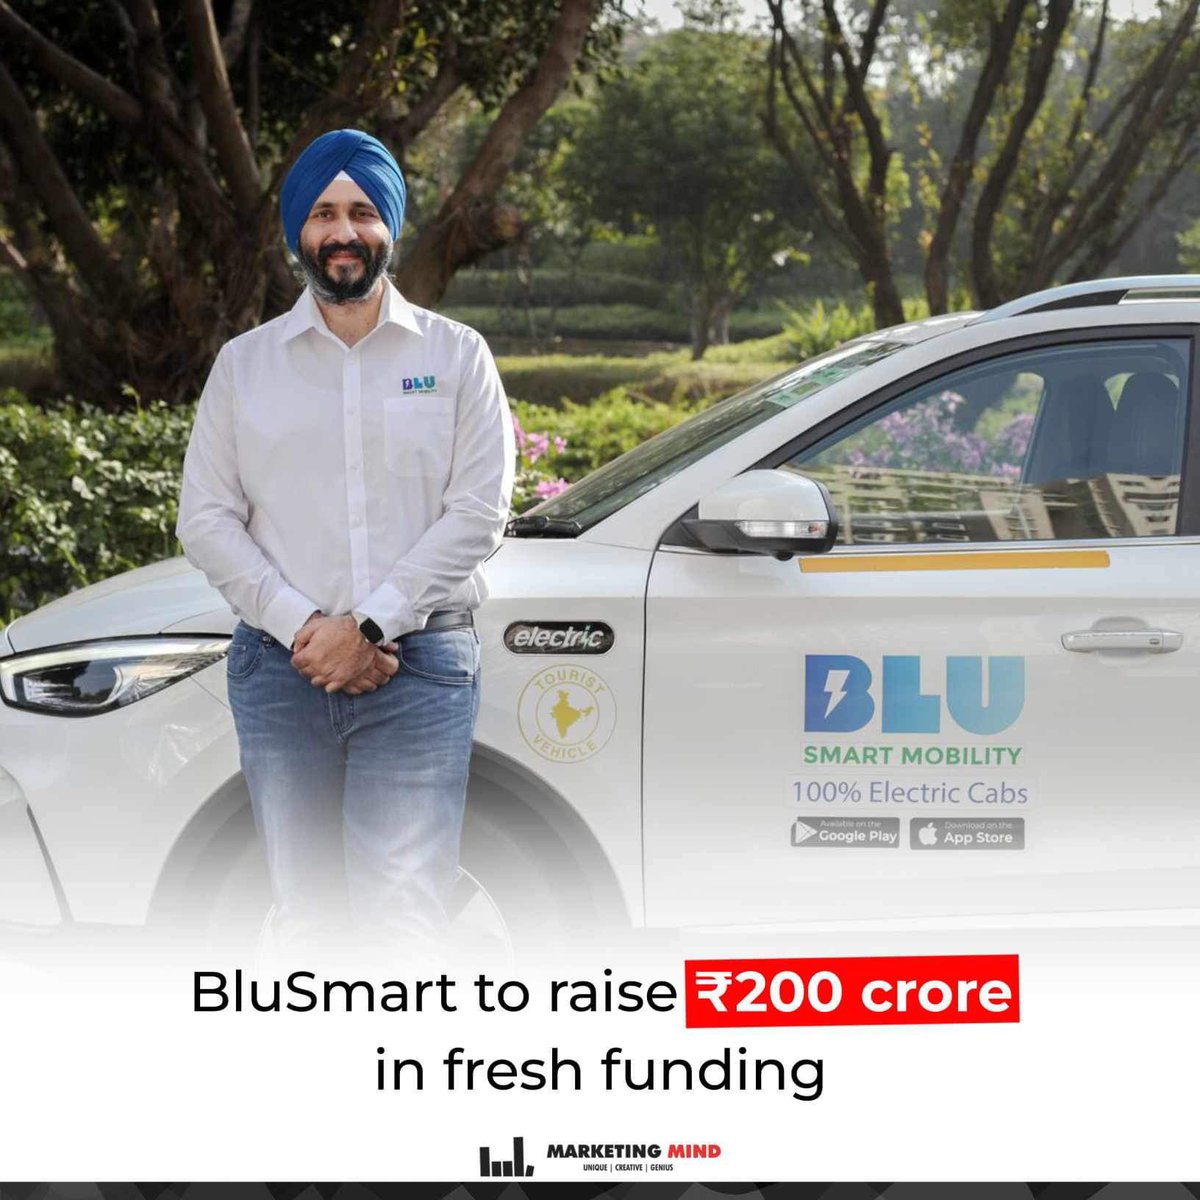 BluSmart Mobility, a company offering electric vehicle ride-hailing services and managing EV charging stations, is raising Rs 200 crore (about $24 million) in a pre-Series B fundraising round.

#MarketingMind #WhatsBuzzing #BluSmart #FundingAlert